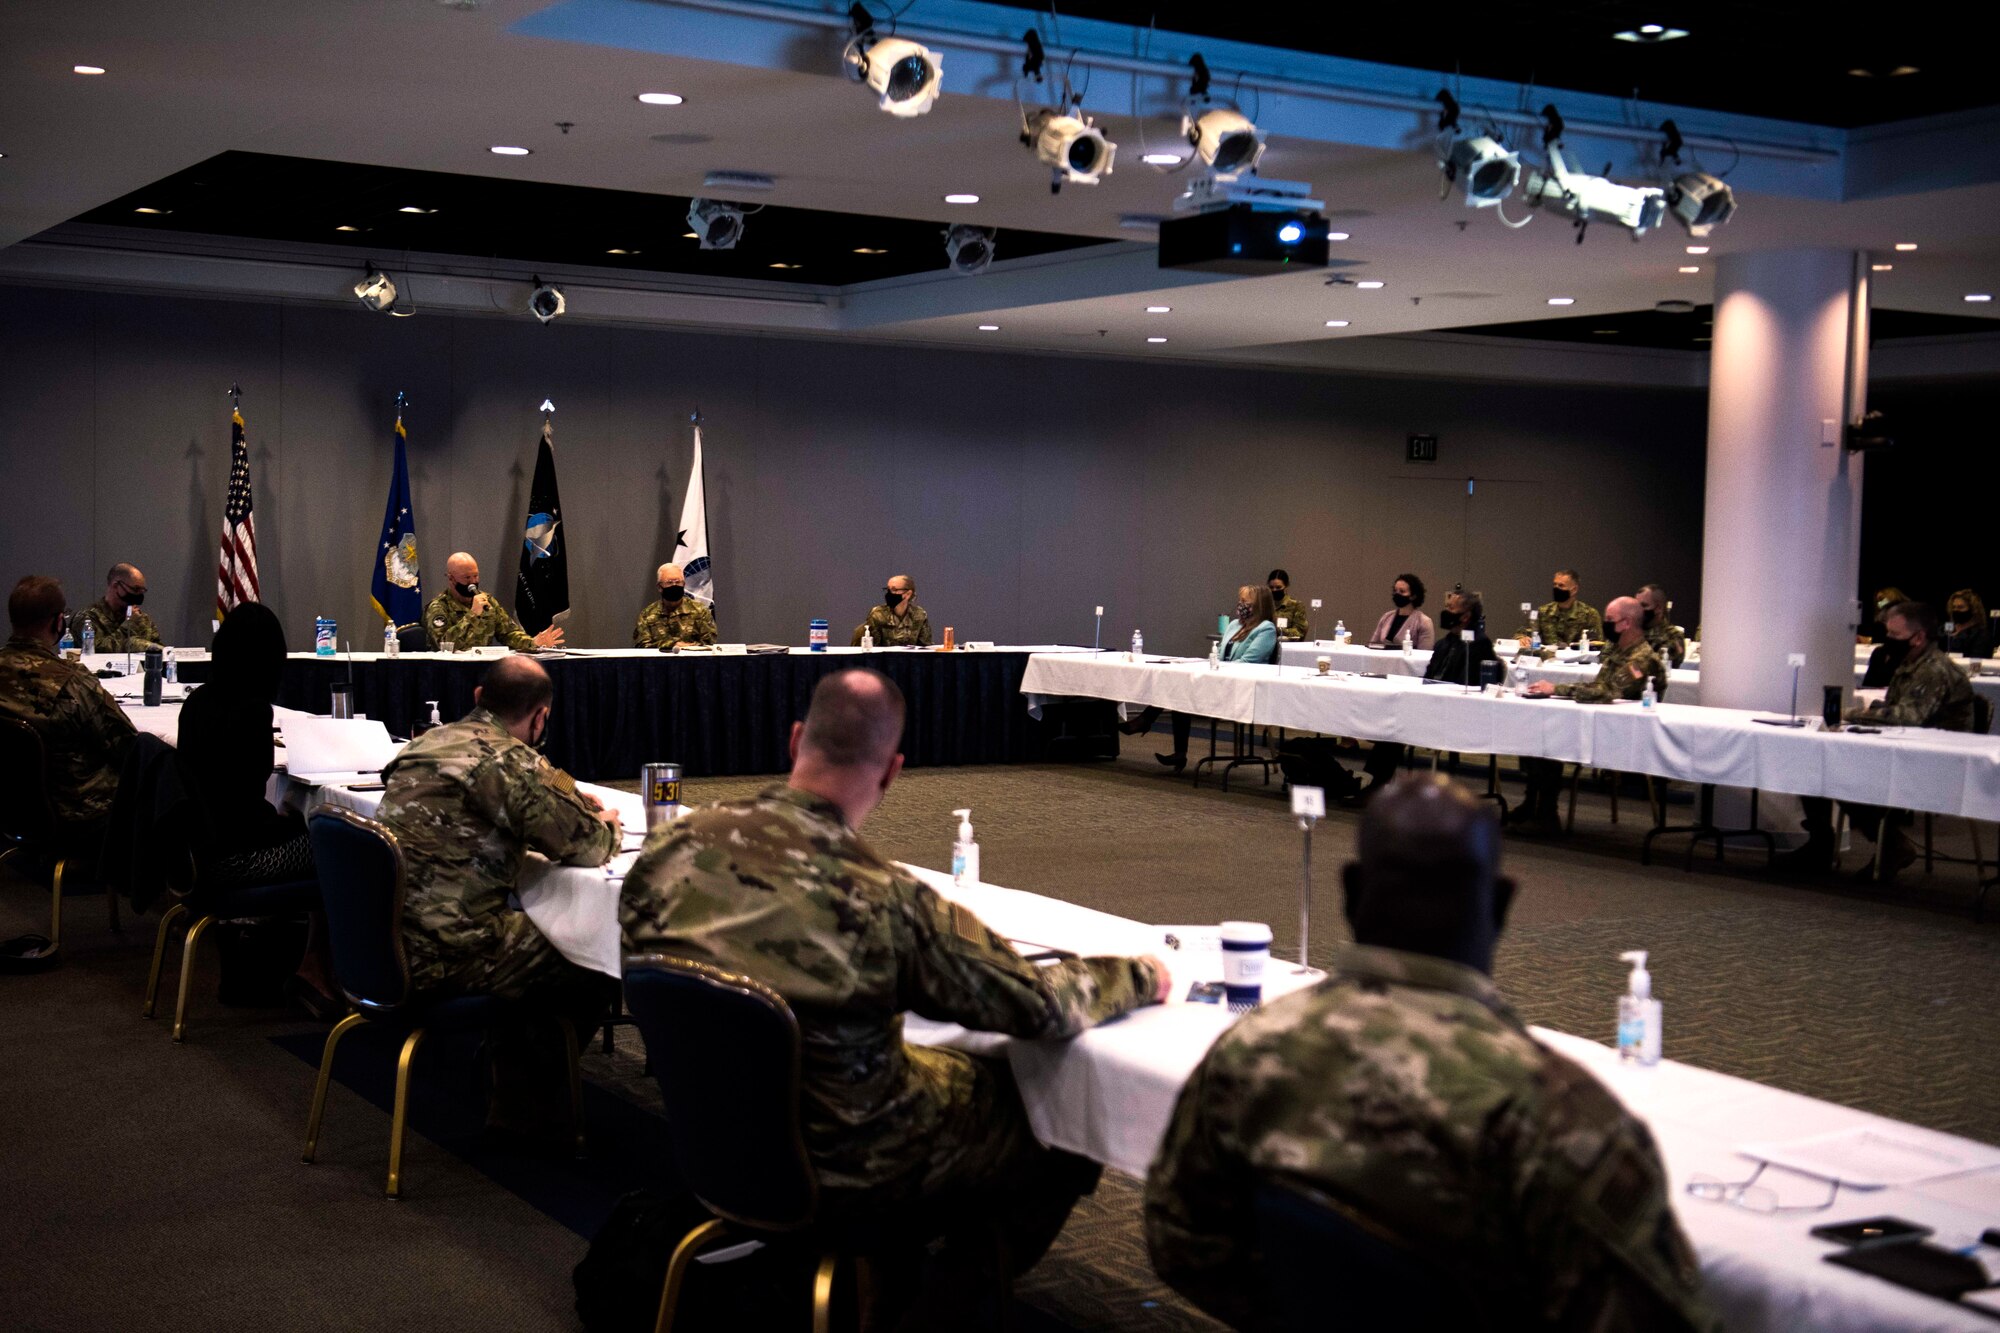 Leaders from the U.S. Space Force, Space and Missile Systems Center, and 61st Air Base Group congregate, in-person and virtually, for a Senior Leader Summit at Los Angeles Air Force Base, California, April 7, 2021. More than 30 attendees participated in the event led by U.S. Space Force Gen. John W. “Jay” Raymond, Chief of Space Operations, who focused on the topic of “Where we’ve been, where we’re headed” regarding the past, present and future of the Space Force. (U.S. Space Force photo by Staff Sgt. Luke Kitterman)